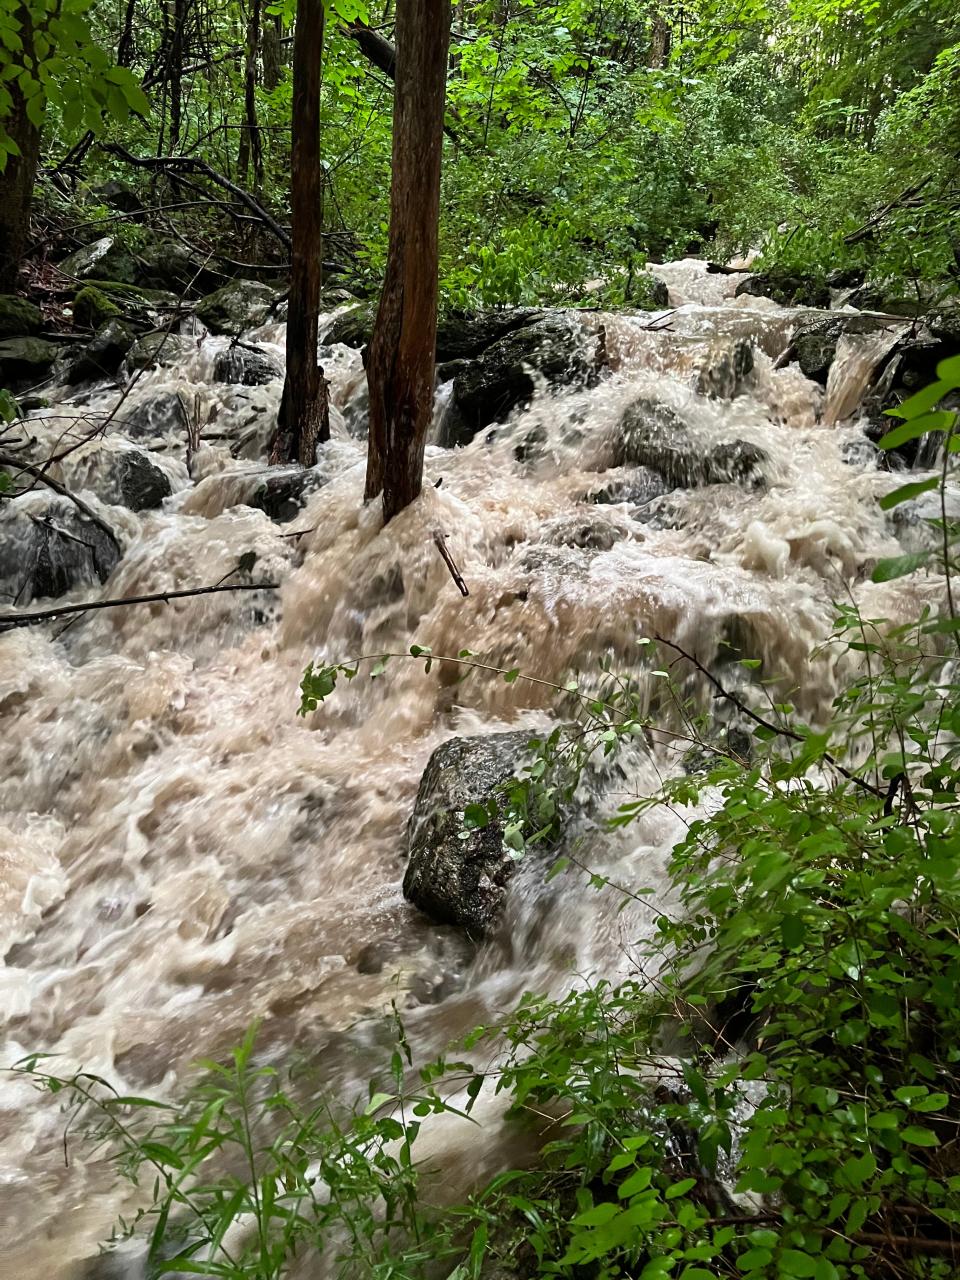 The Sucker Brook roars in Williston on July 16, 2023 following days of excessive rain and flooding that devastated may Vermont homes and businesses. This part of the Sucker Brook is typically a docile, trickling stream close to Williston area hiking.